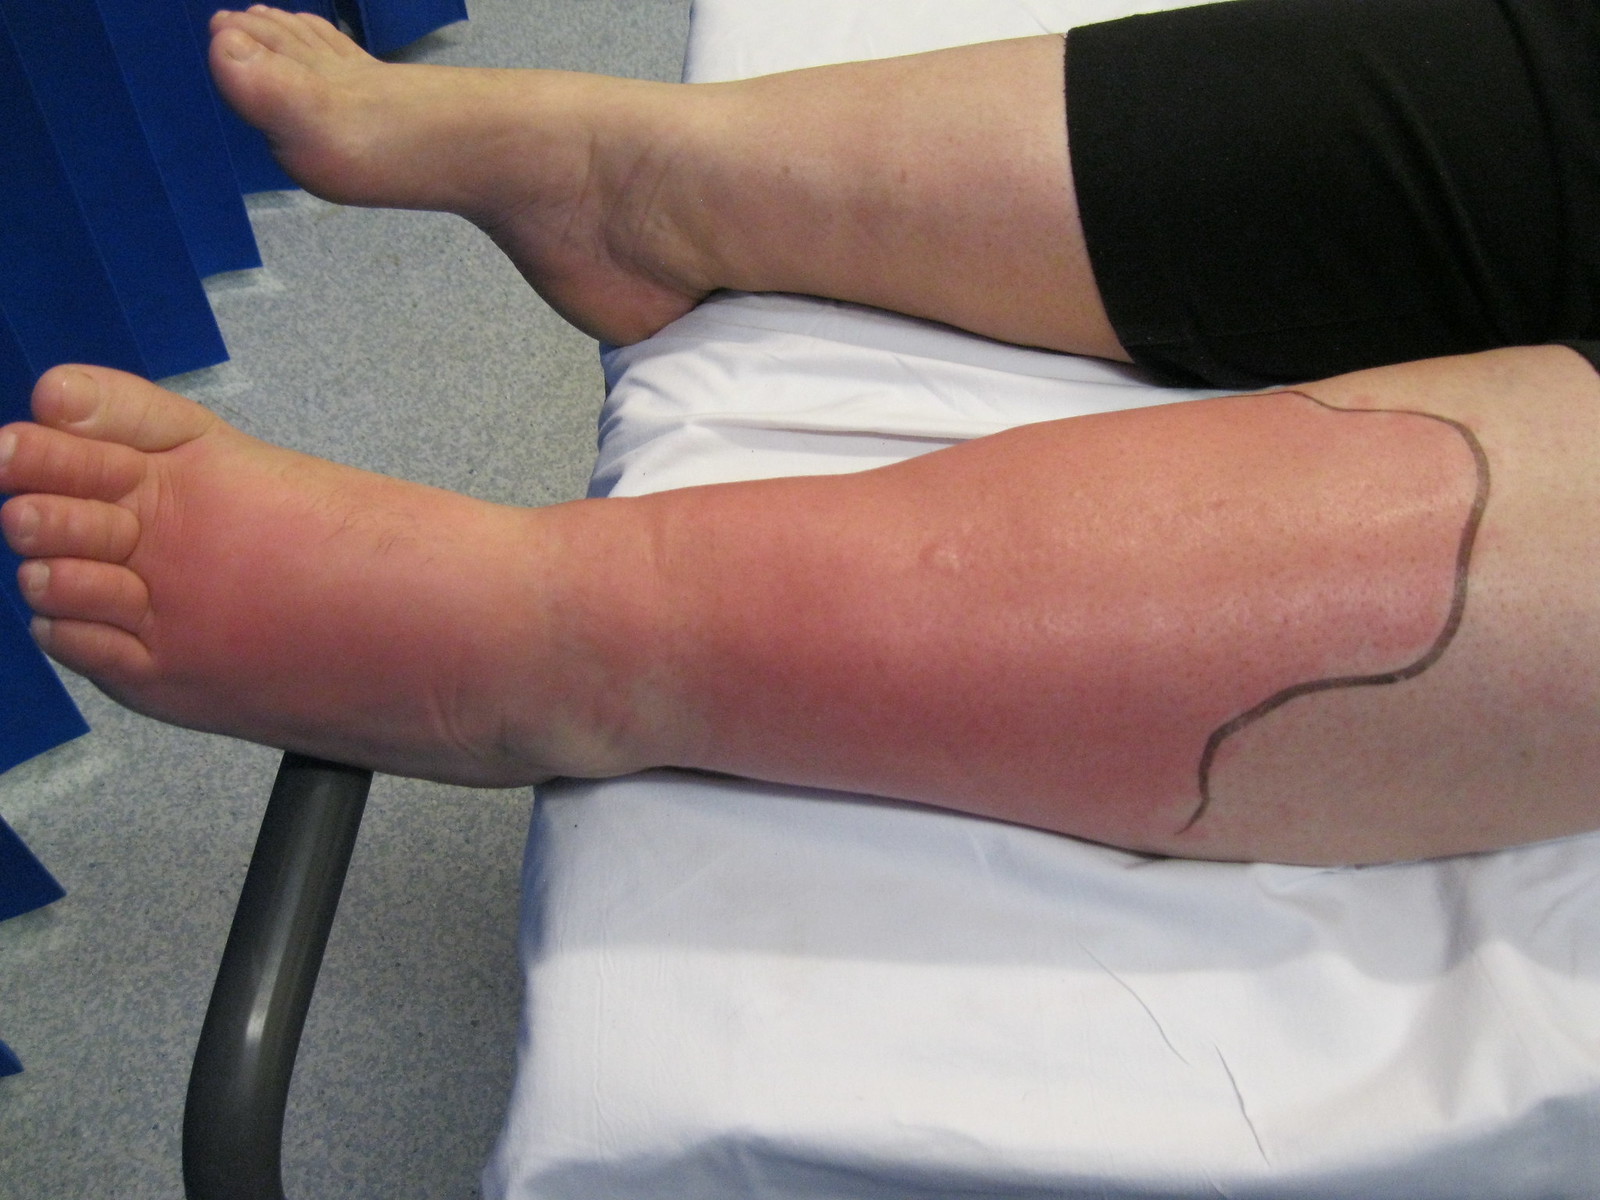 Cellulitis | Concise Medical Knowledge